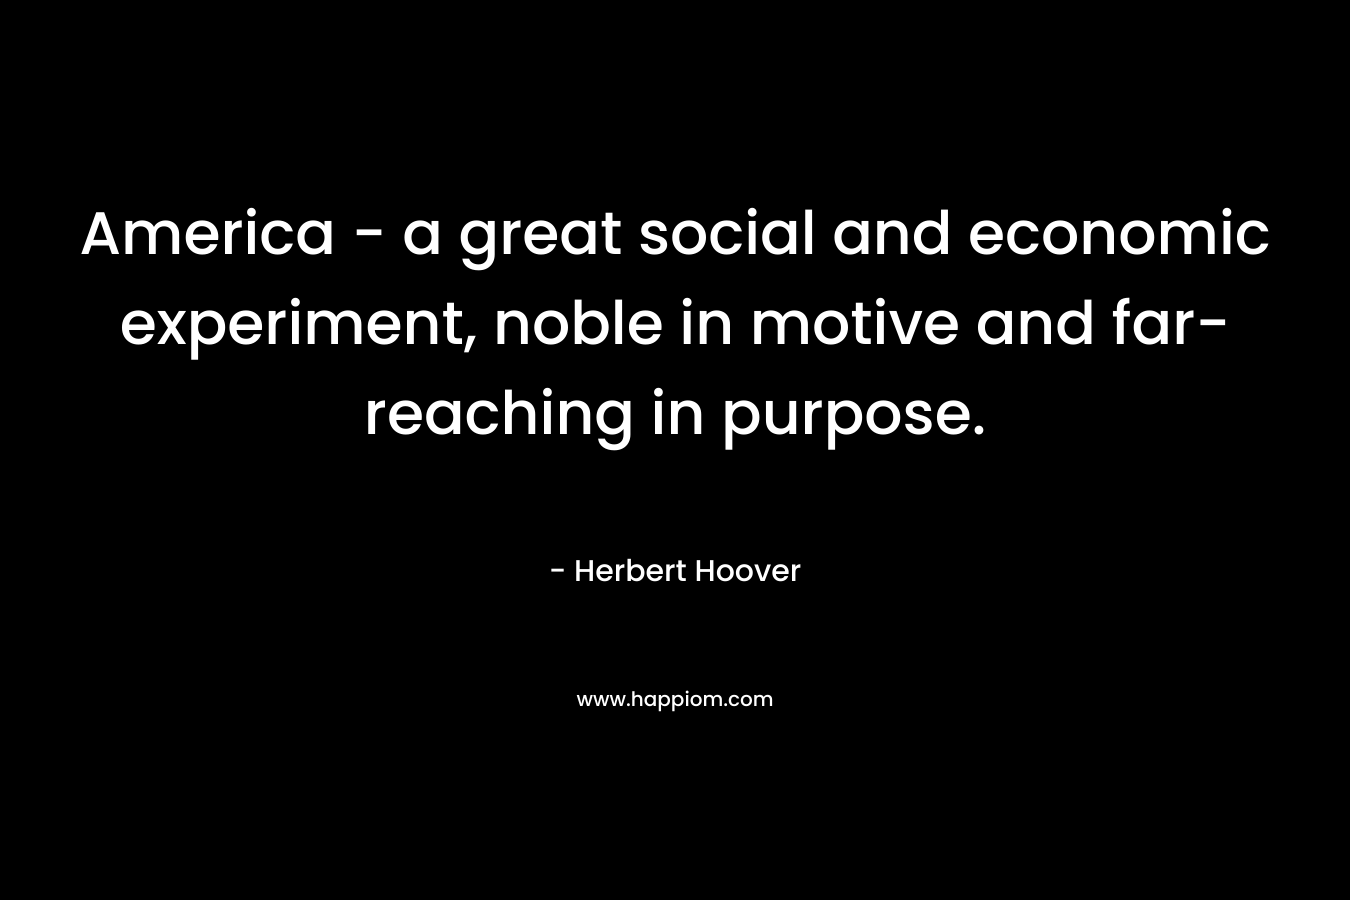 America – a great social and economic experiment, noble in motive and far-reaching in purpose. – Herbert Hoover